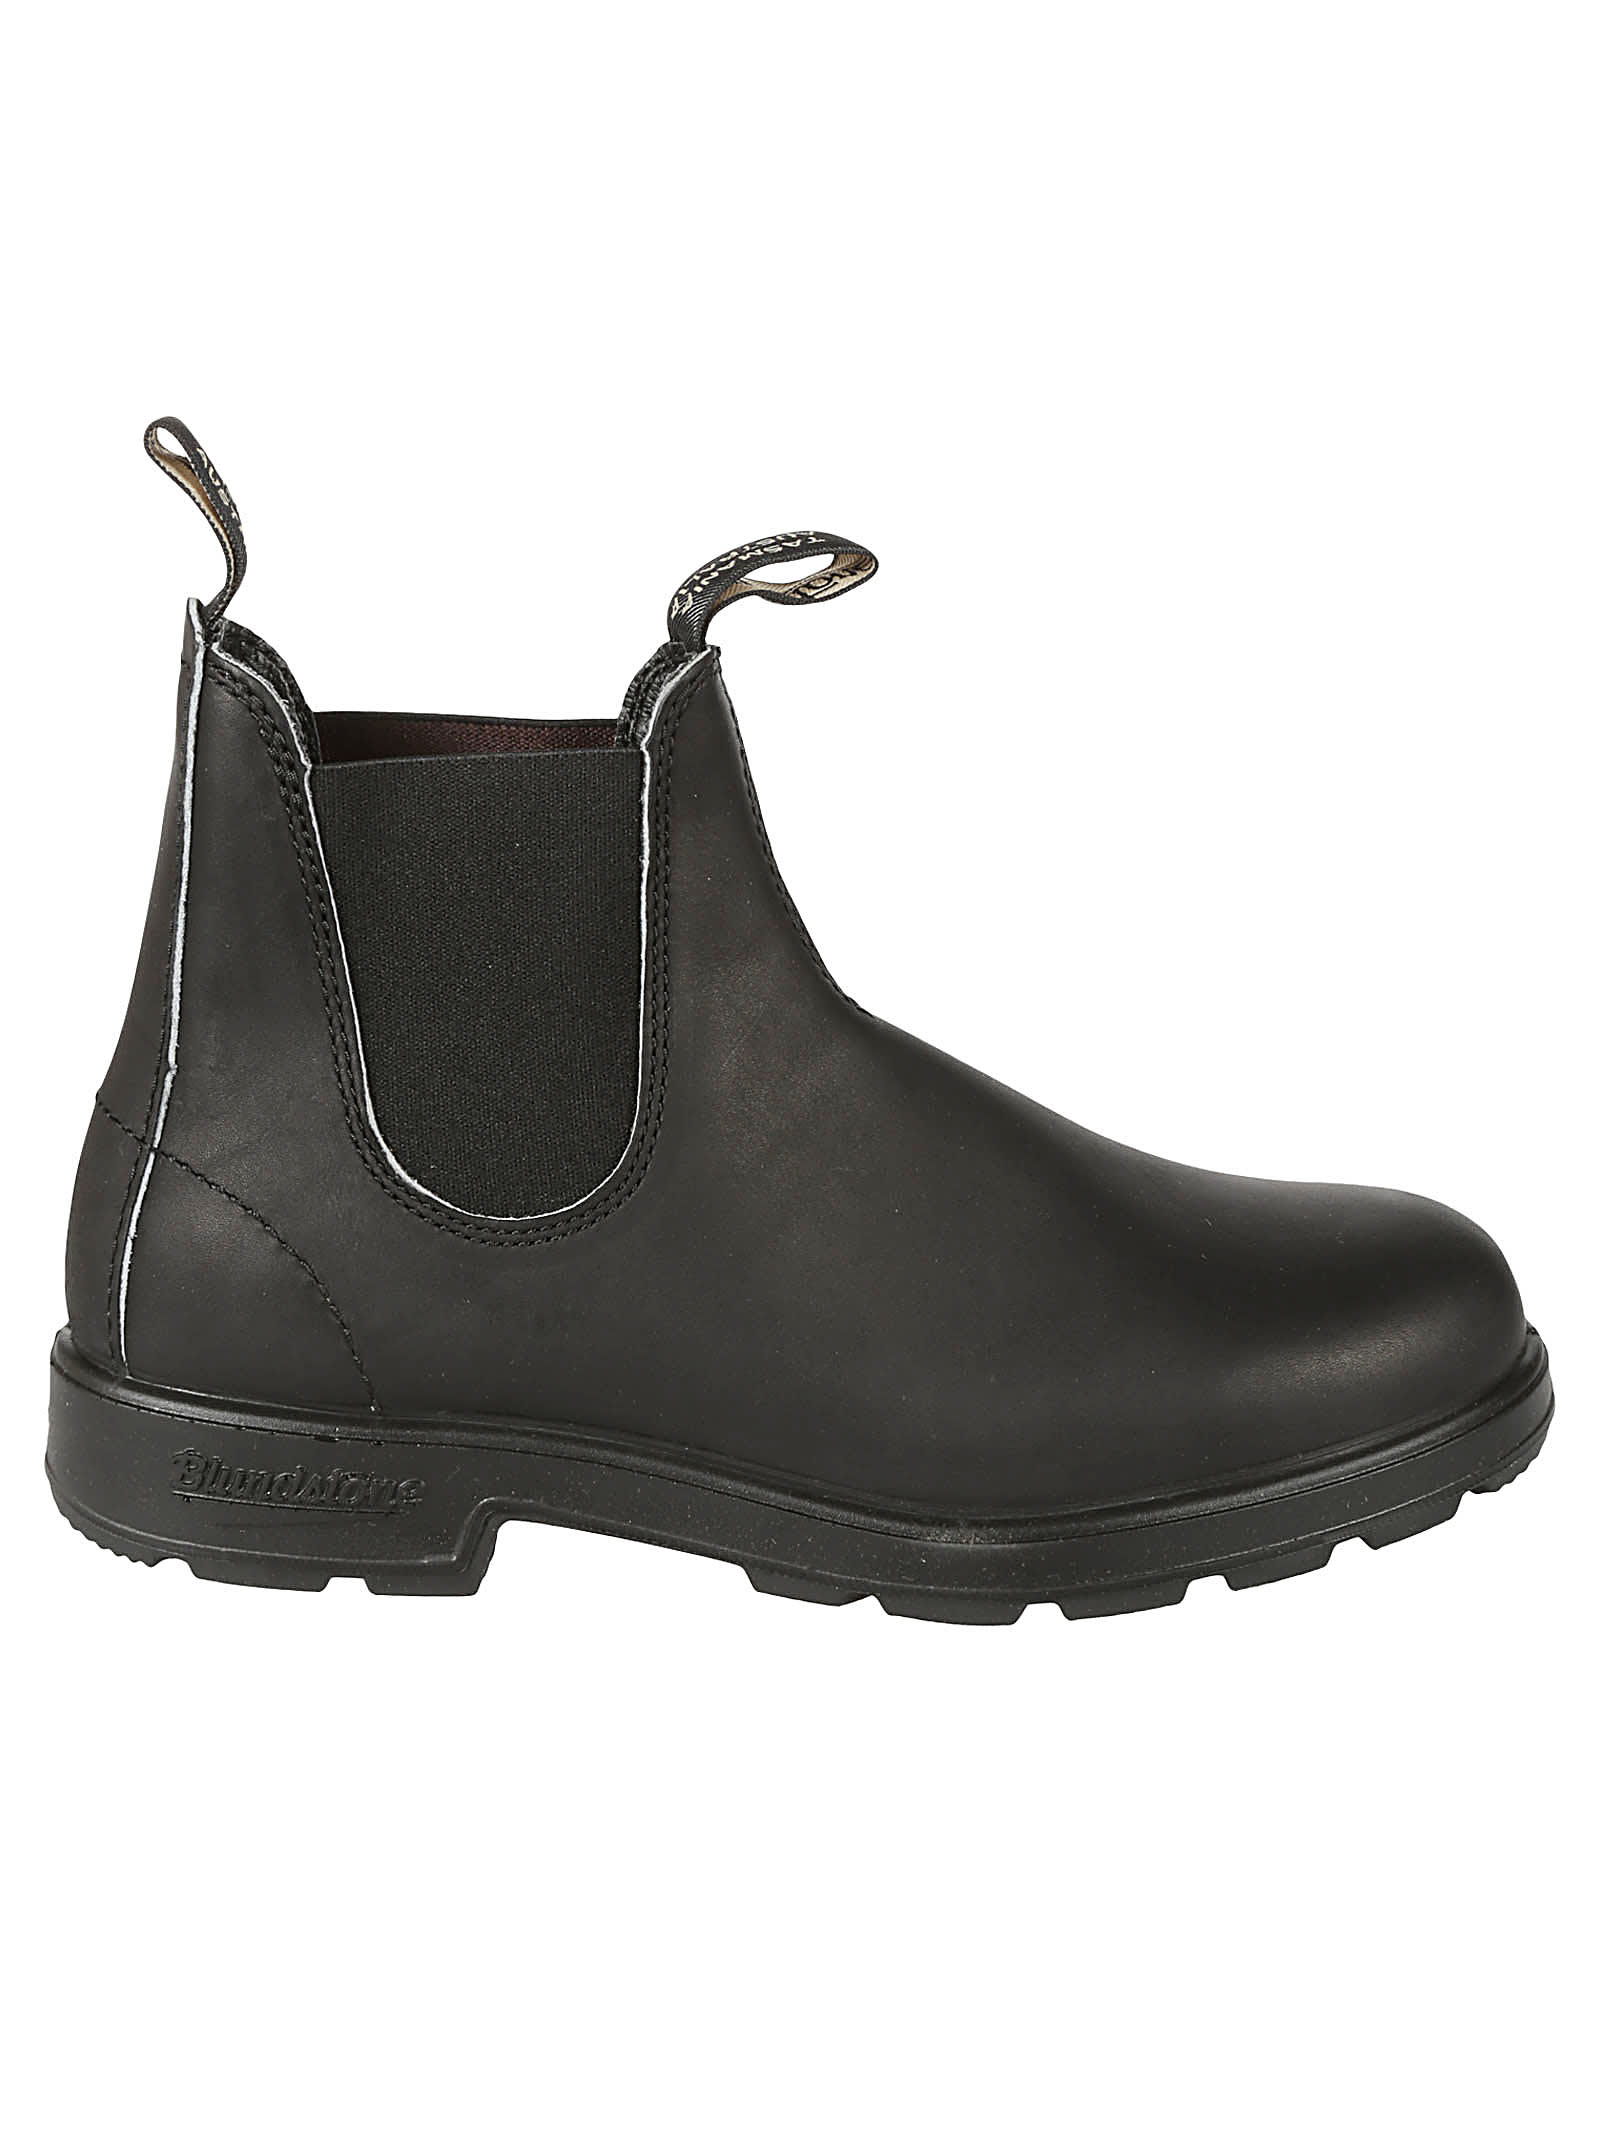 Elastic Sided V-cut Ankle Boots Blundstone